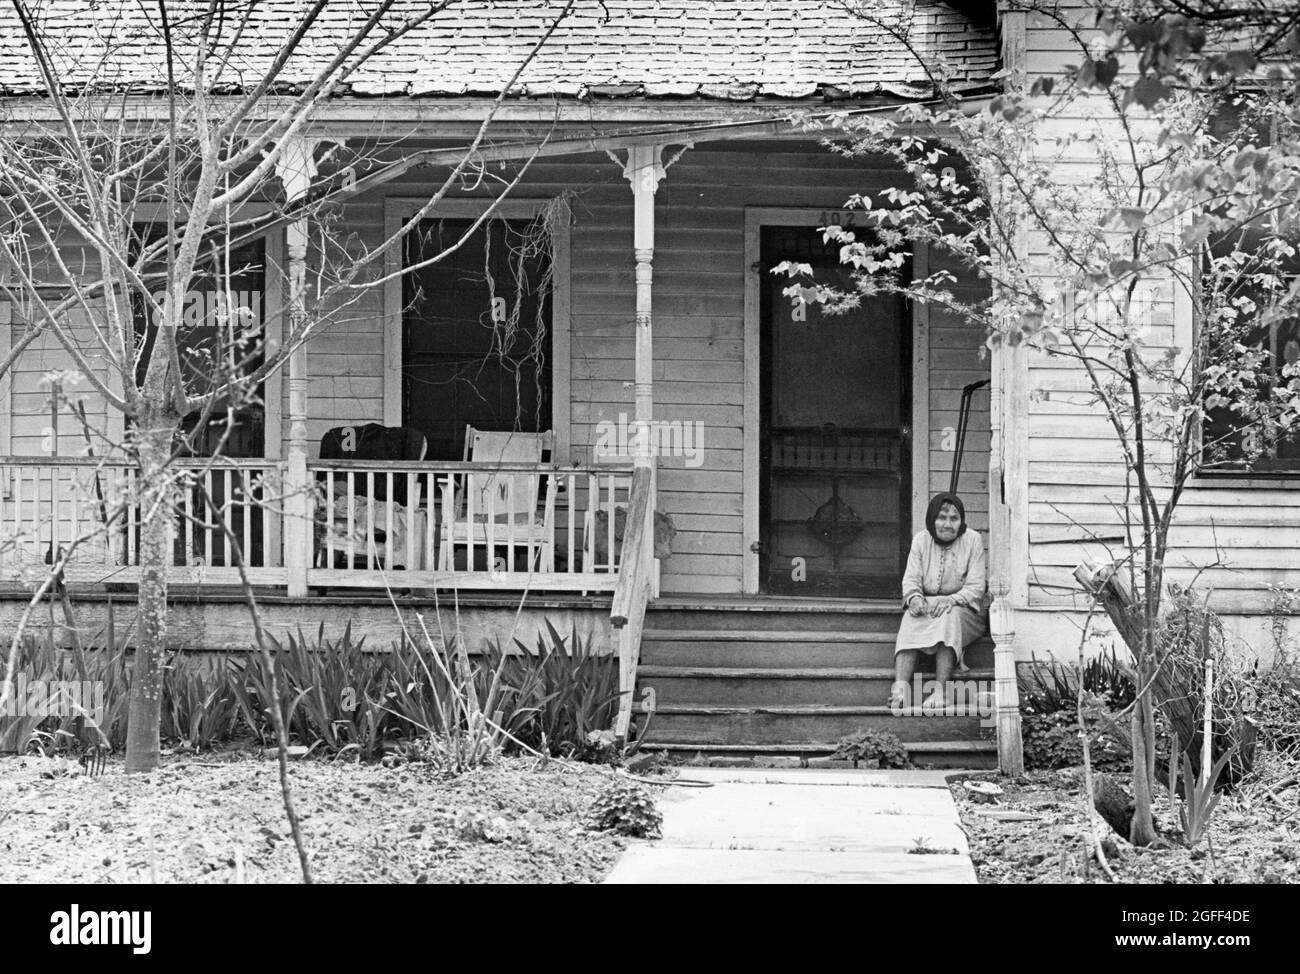 Calvert Texas USA, 1977: Photo feature on elderly woman, Elizabeth Meier of Calvert, Texas who was widowed years earlier and lived in a run-down home in a small town in Grimes County.  ©Bob Daemmrich Stock Photo